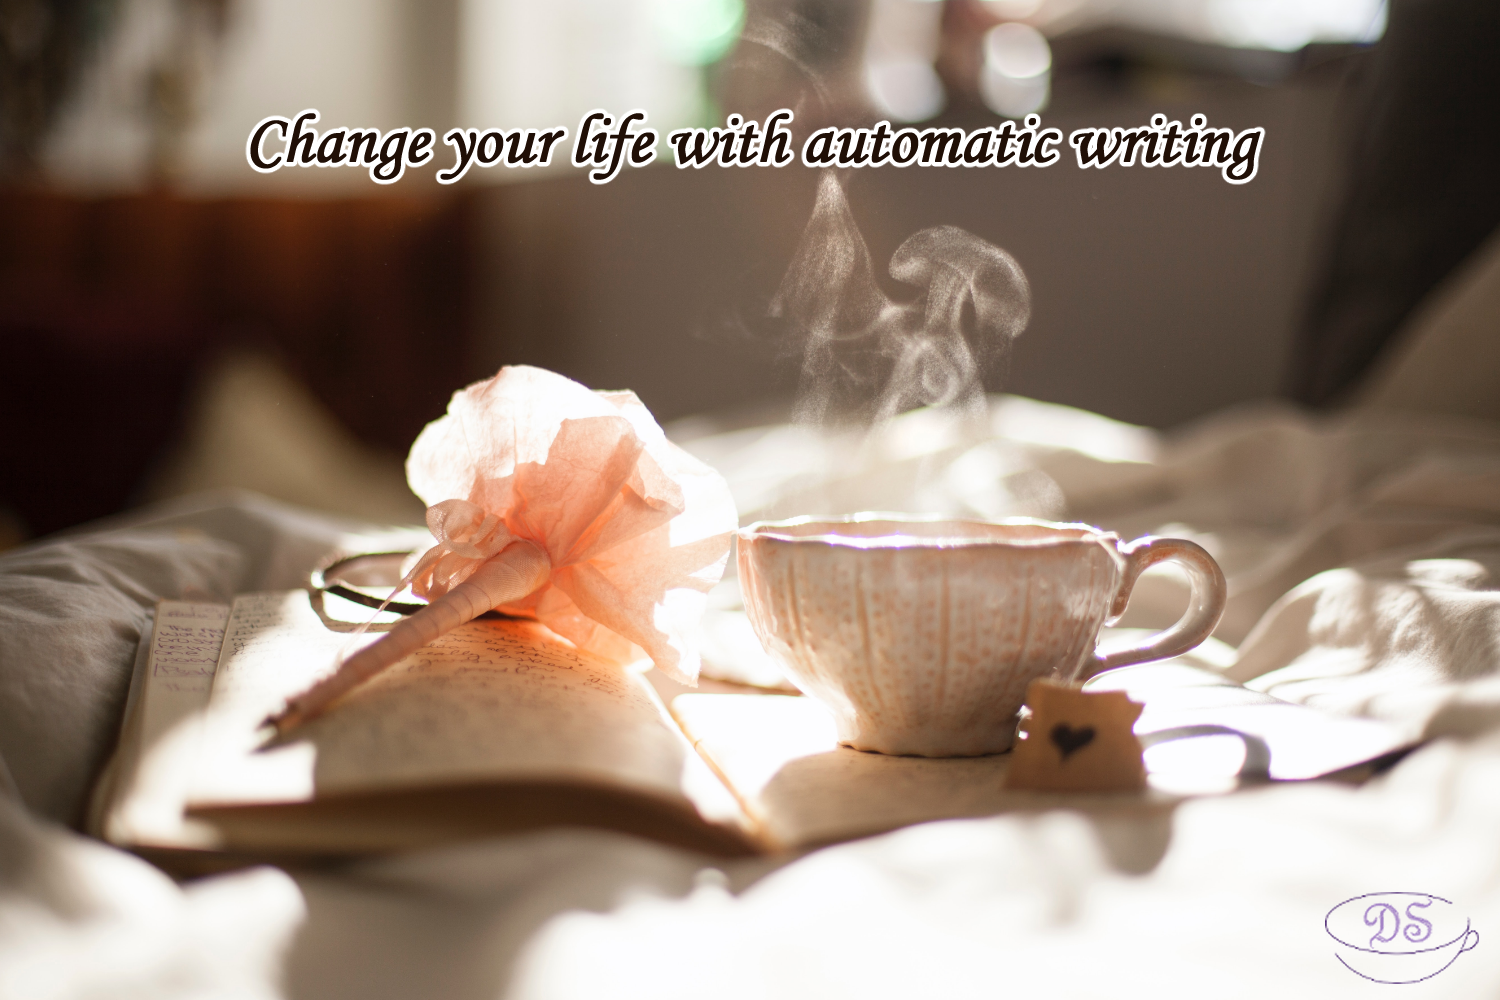 Change Your Life Quickly with Automatic Writing